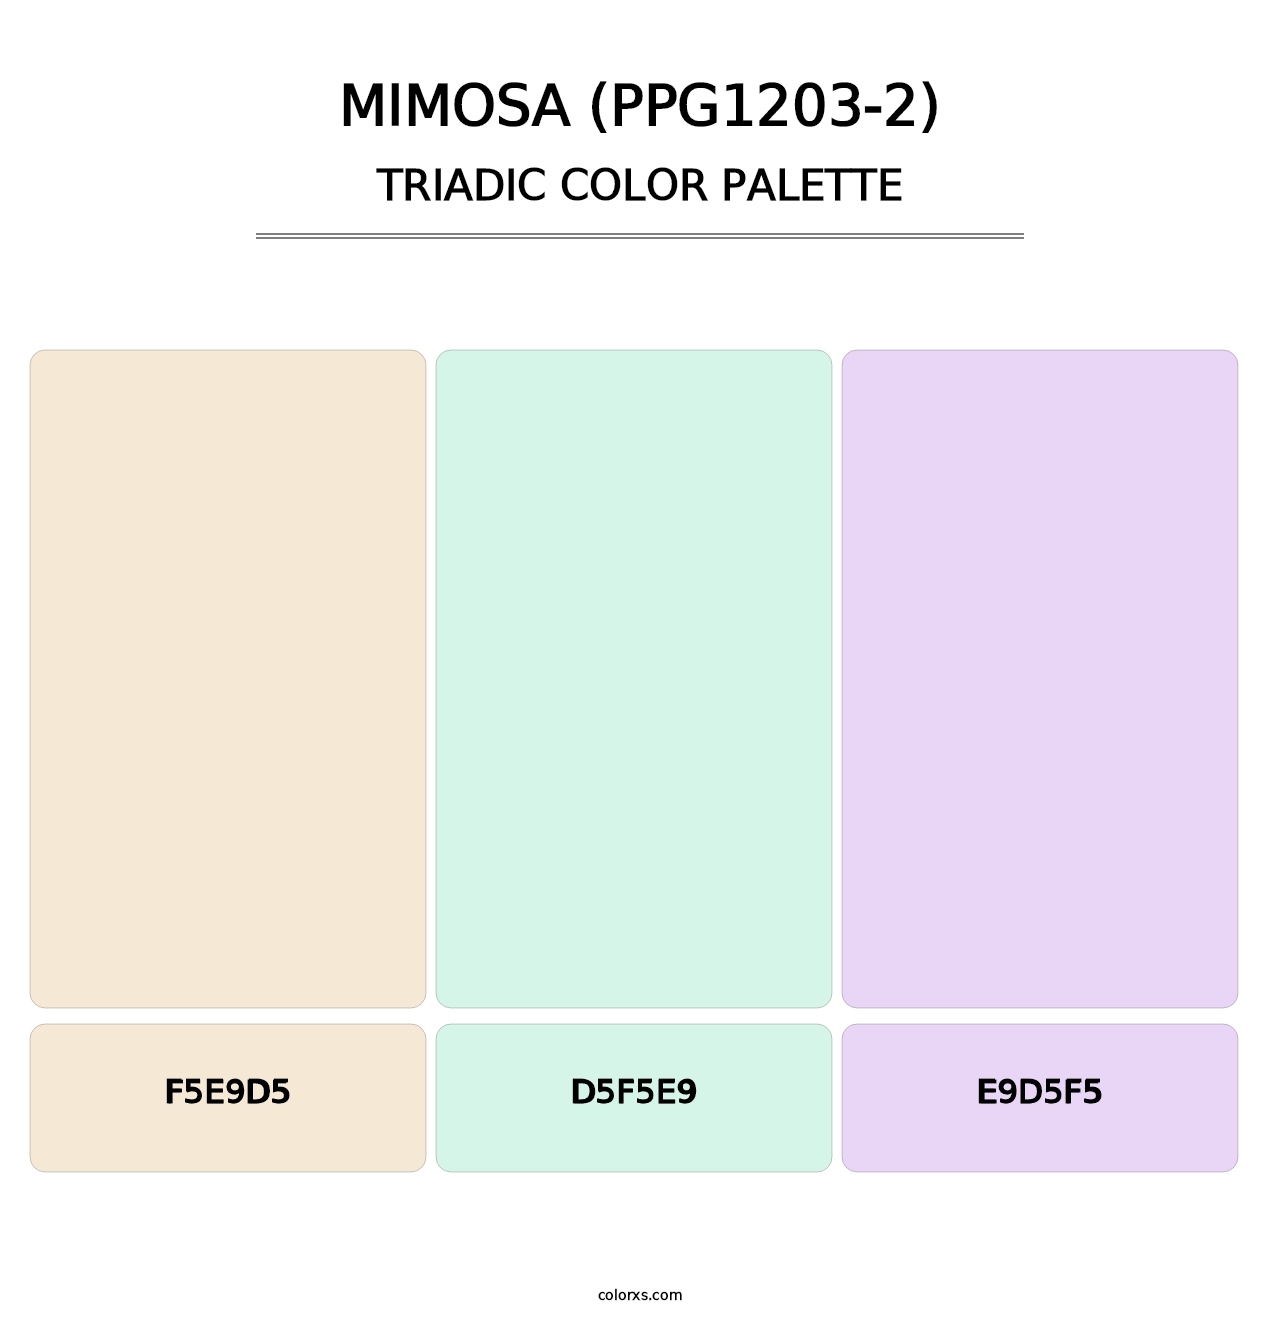 Mimosa (PPG1203-2) - Triadic Color Palette